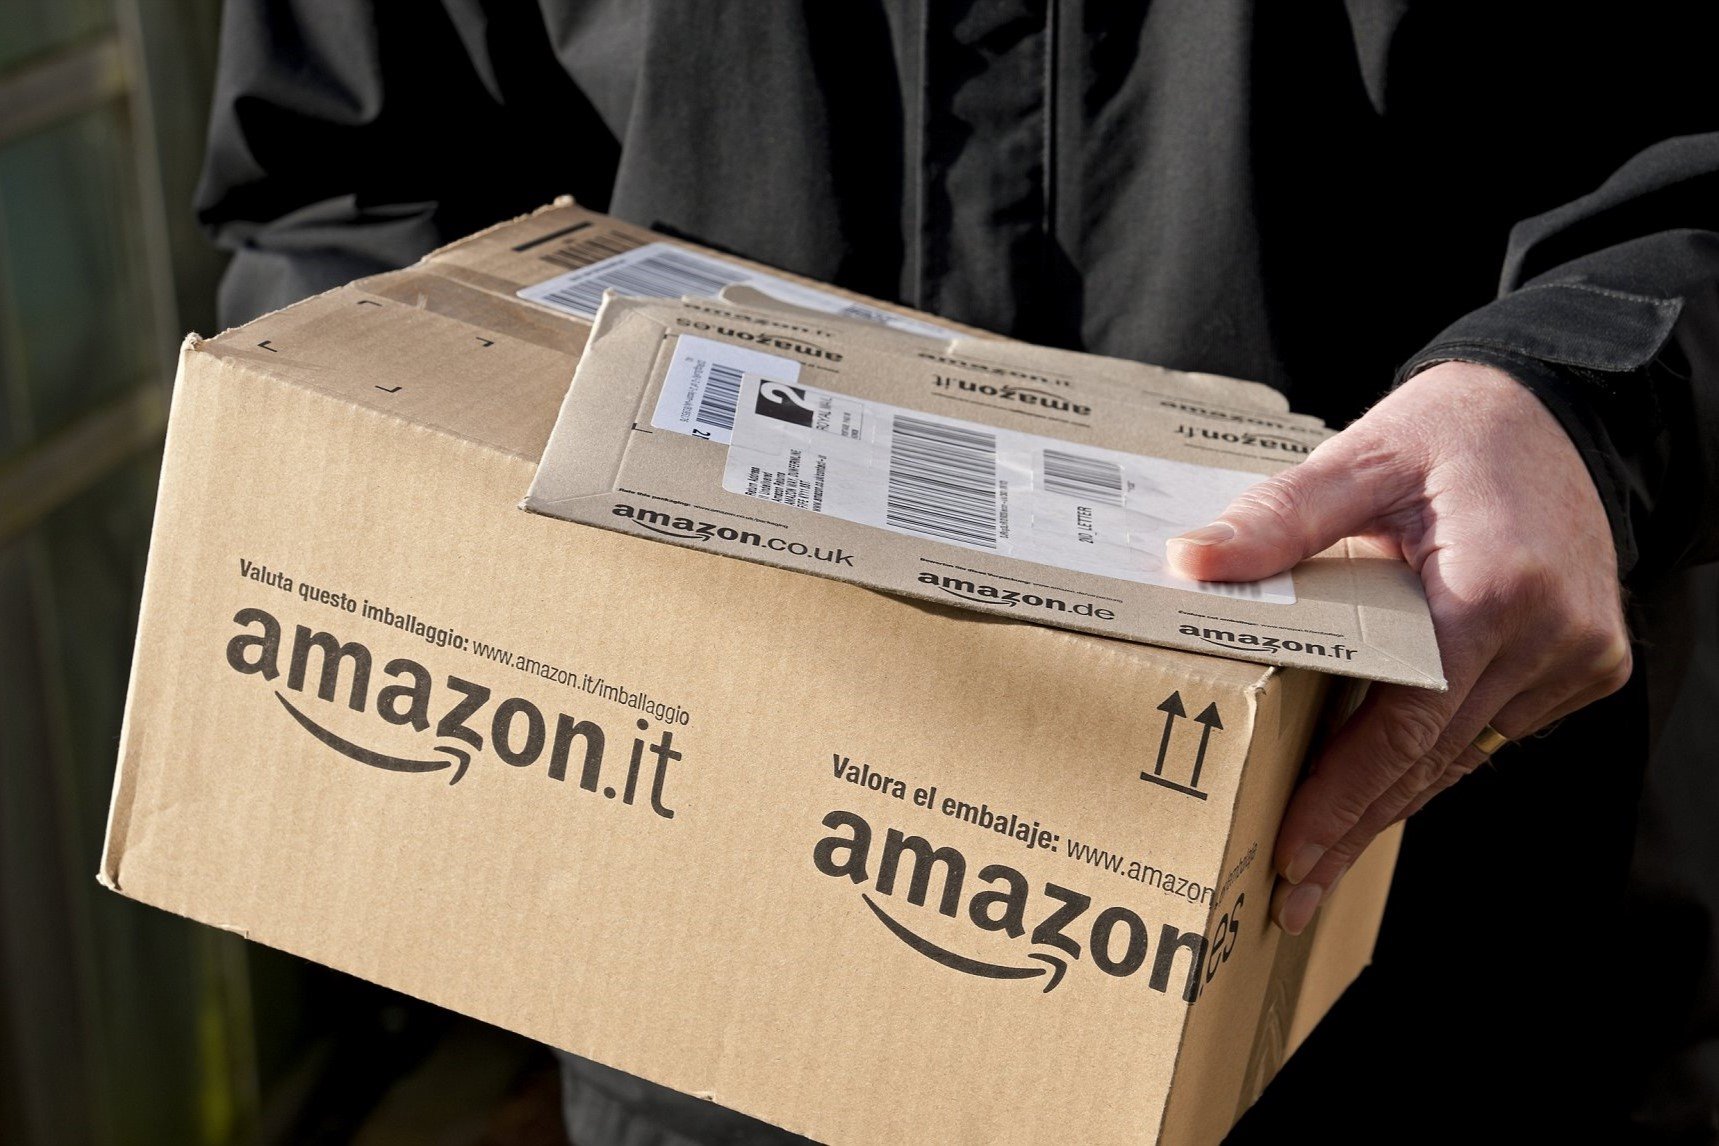 Amazon's Sneaky Delivery Trick: Why You'll Get Your Package Early